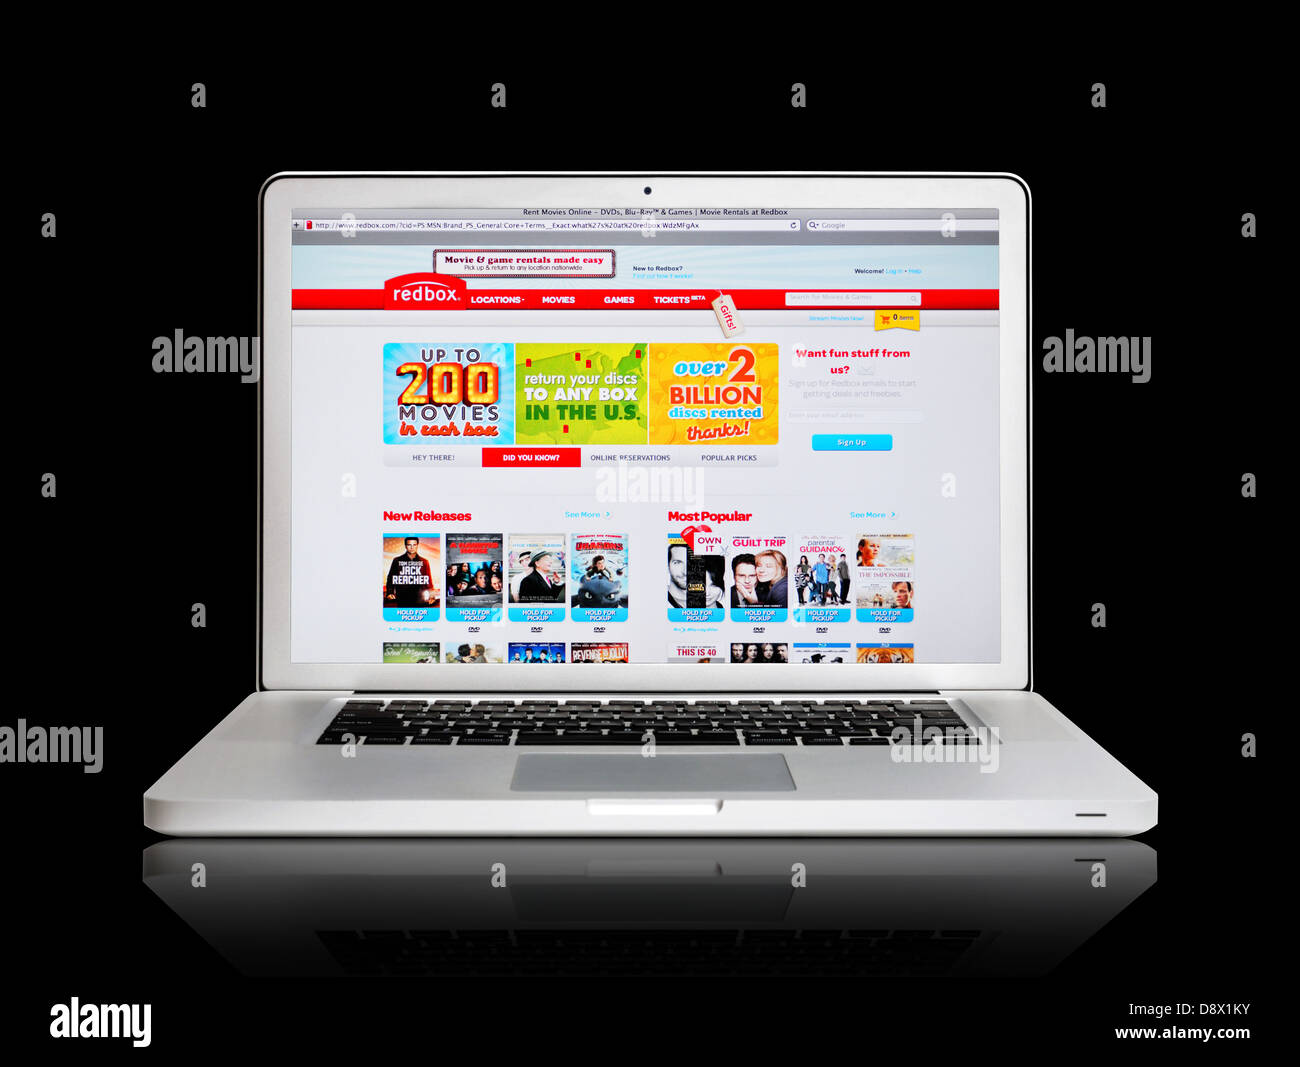 Redbox Instant Streaming Online Movies website on laptop screen Stock Photo